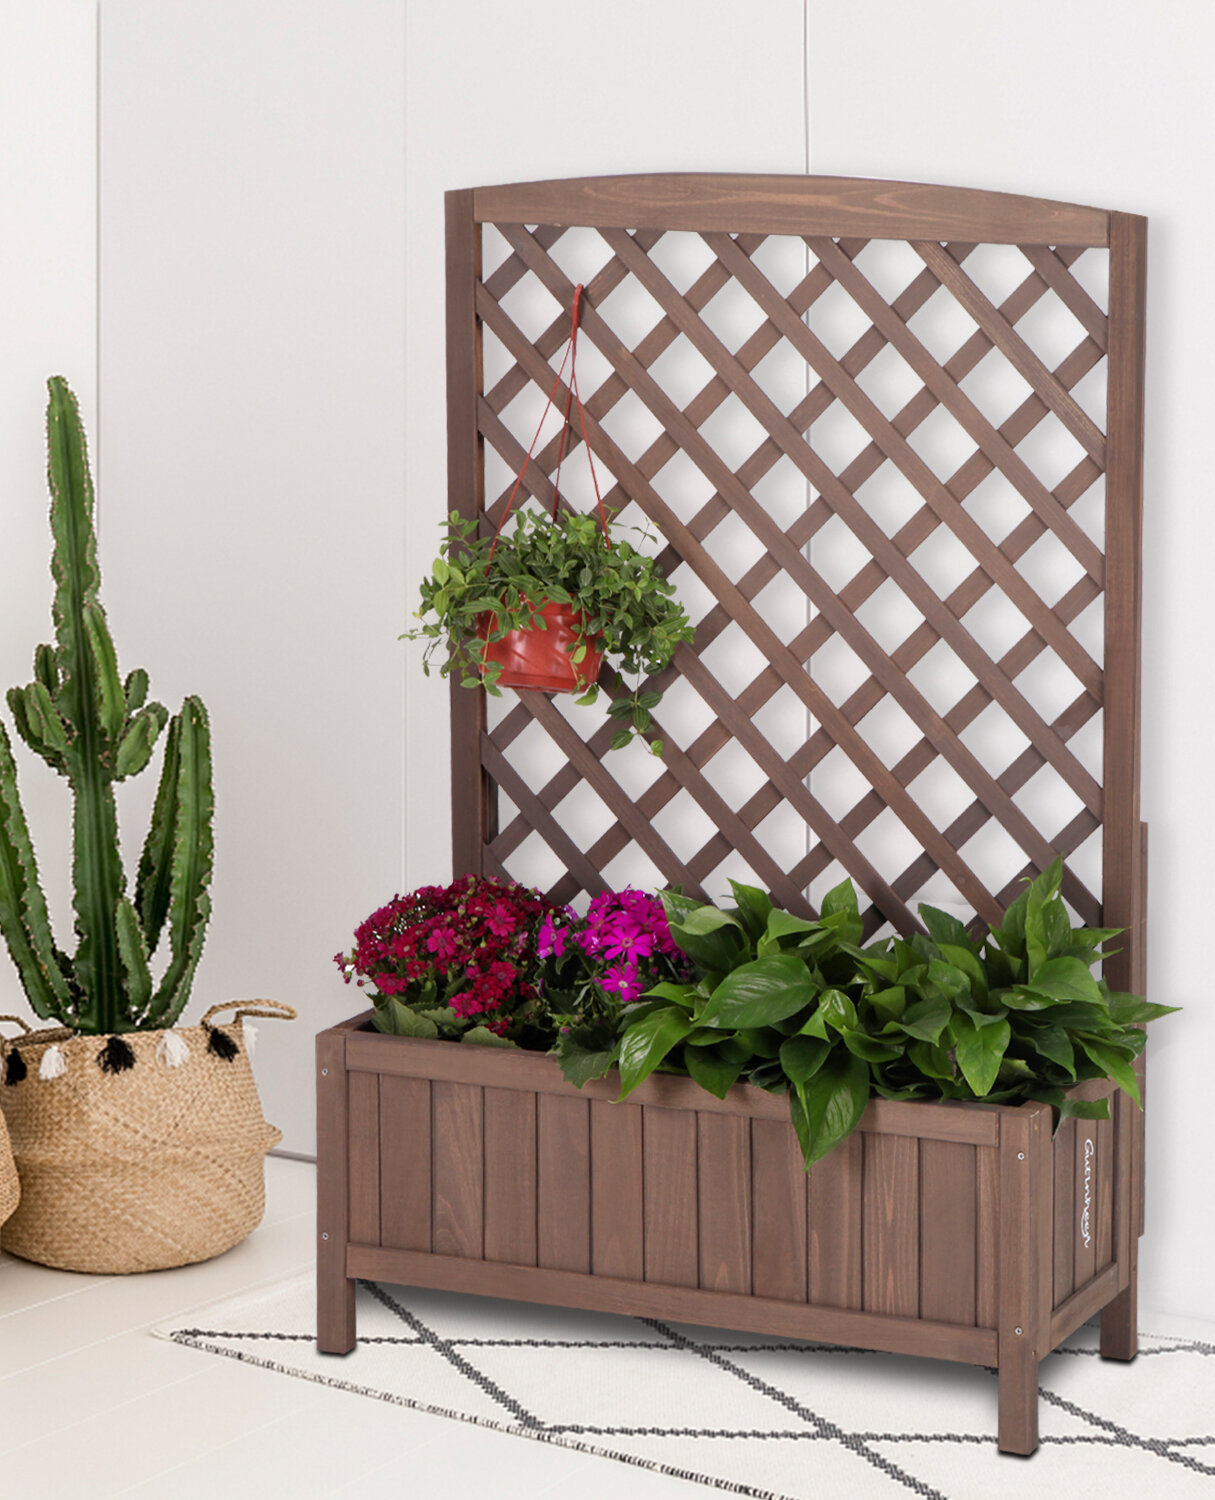 Canditree Garden Rattan Planter with Trellis 11.8x11.8x42.1 Free Standing Plant Raised Bed for Flowers Climbing Plants